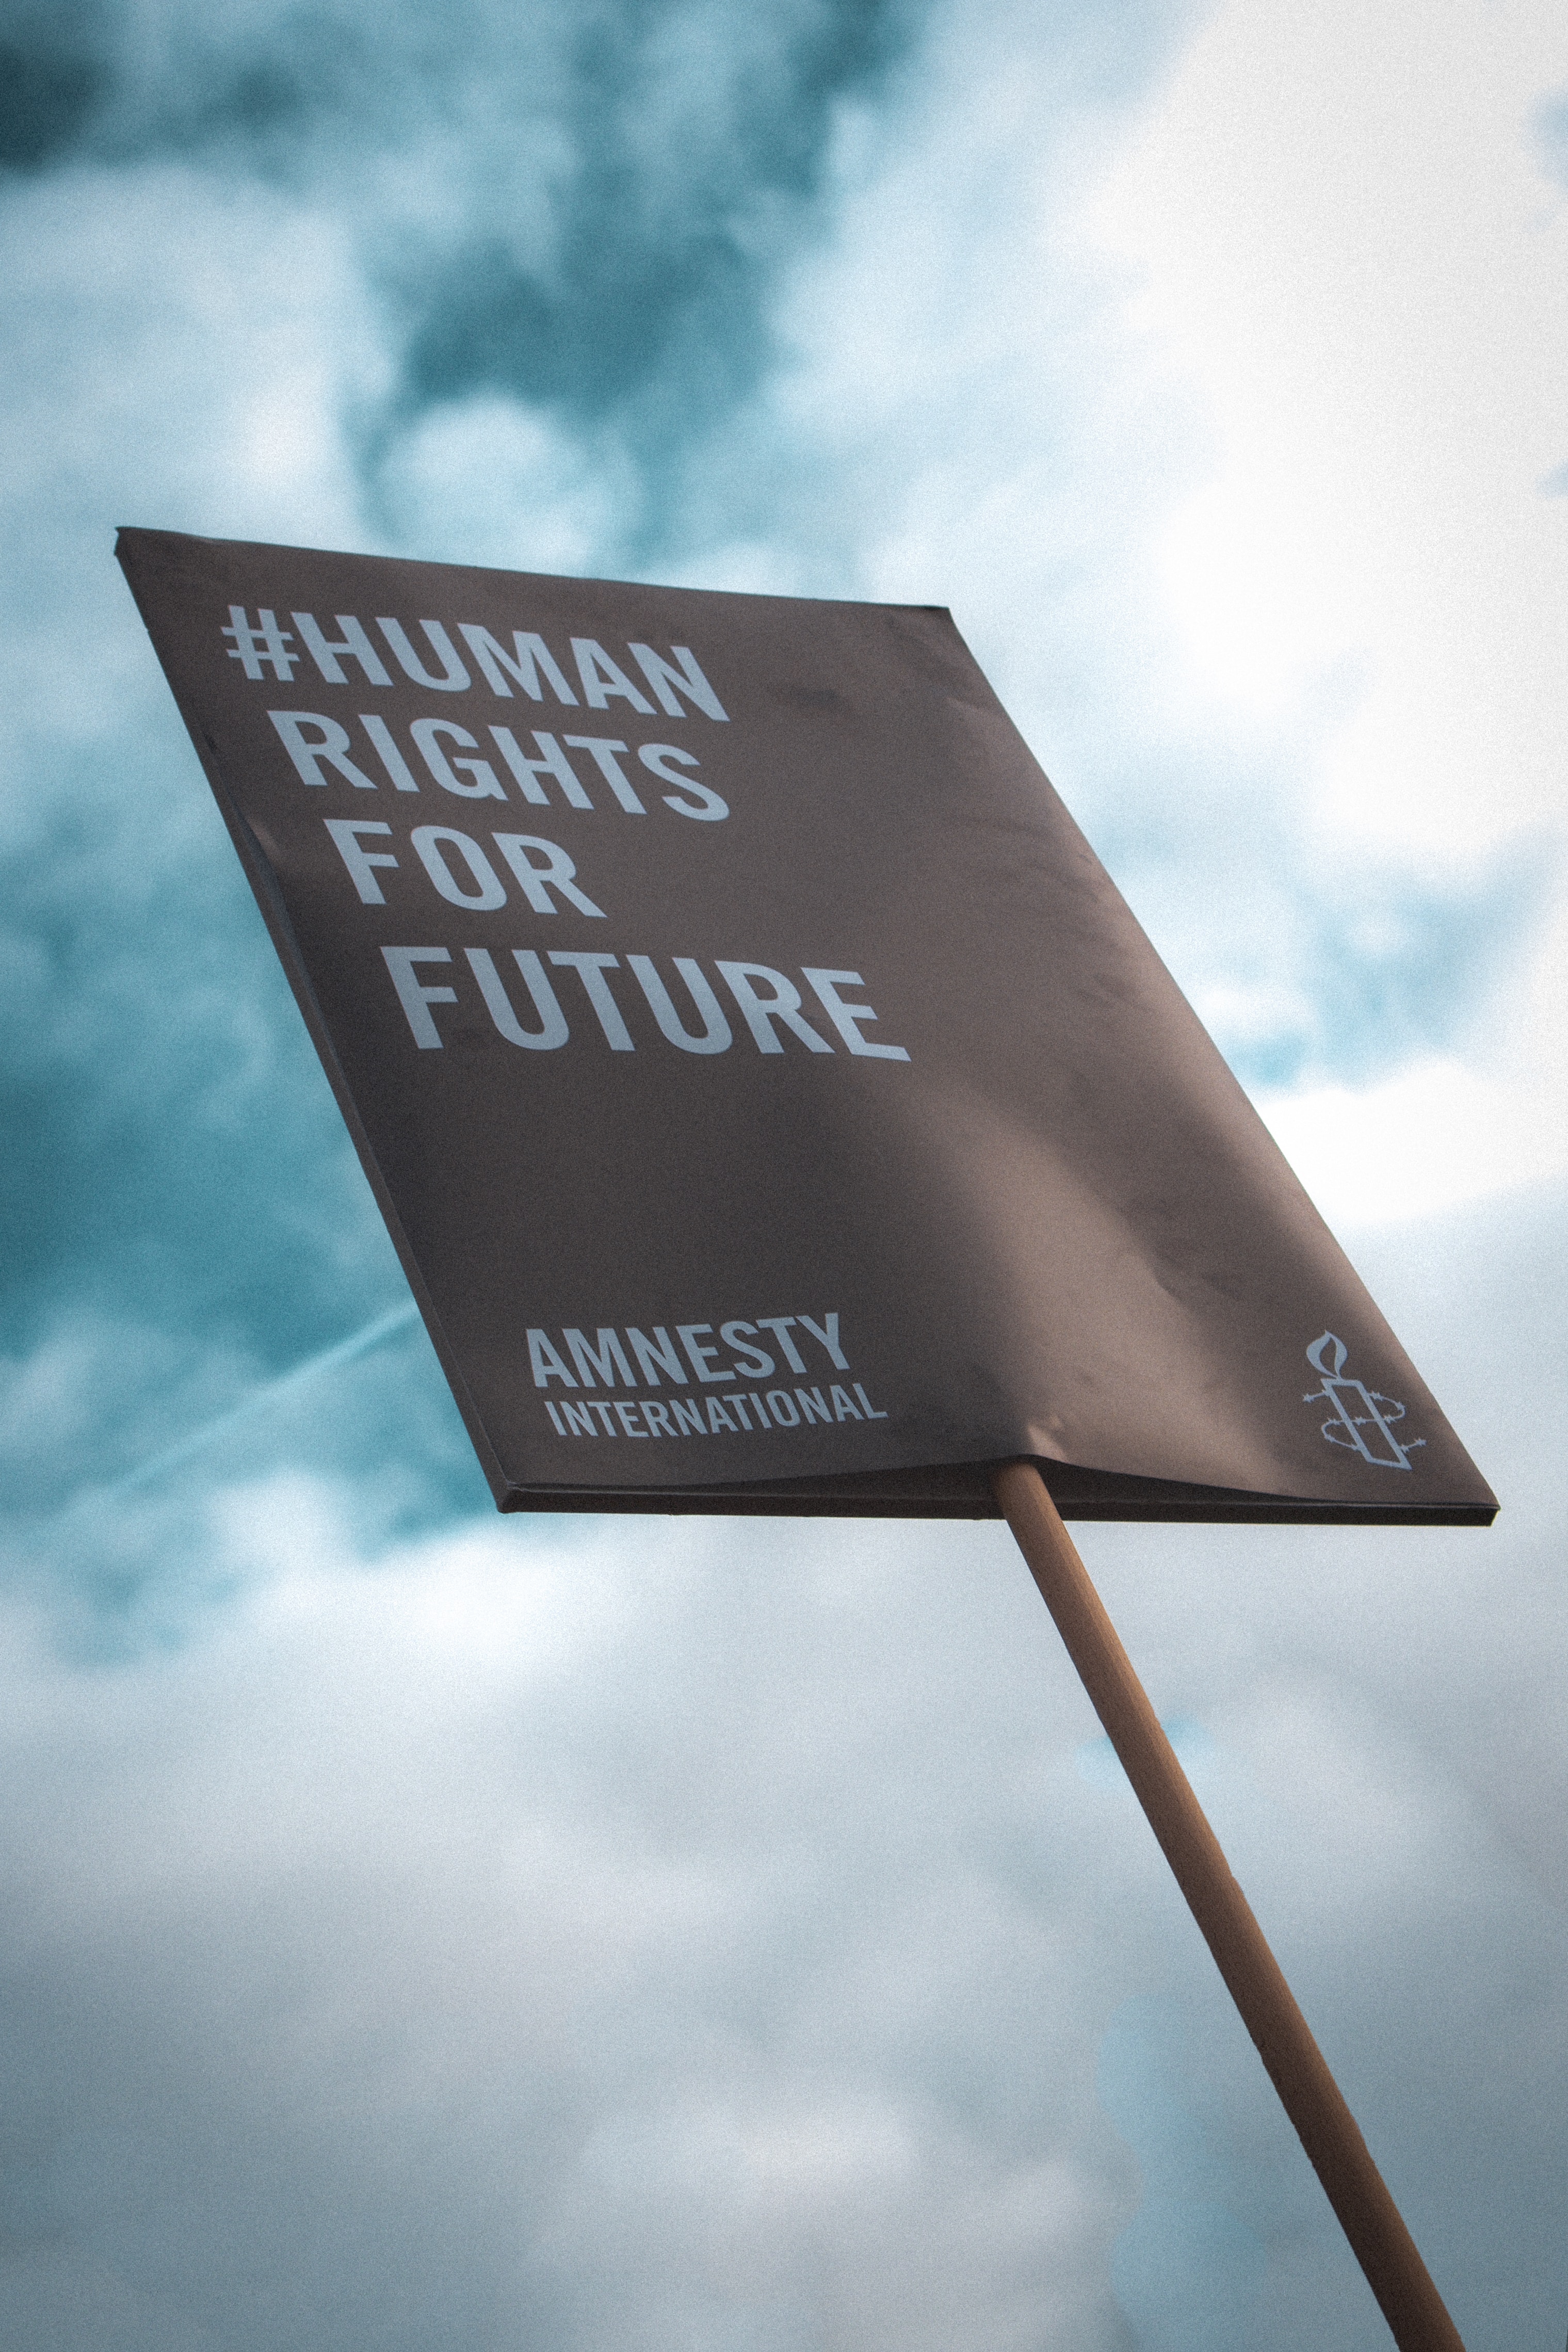 UAE: NEW SHAM TRIAL TARGETING DISSIDENTS DURING COP28 REVEALS AUTHORITIES’ SHAMELESS CONTEMPT FOR HUMAN RIGHTS